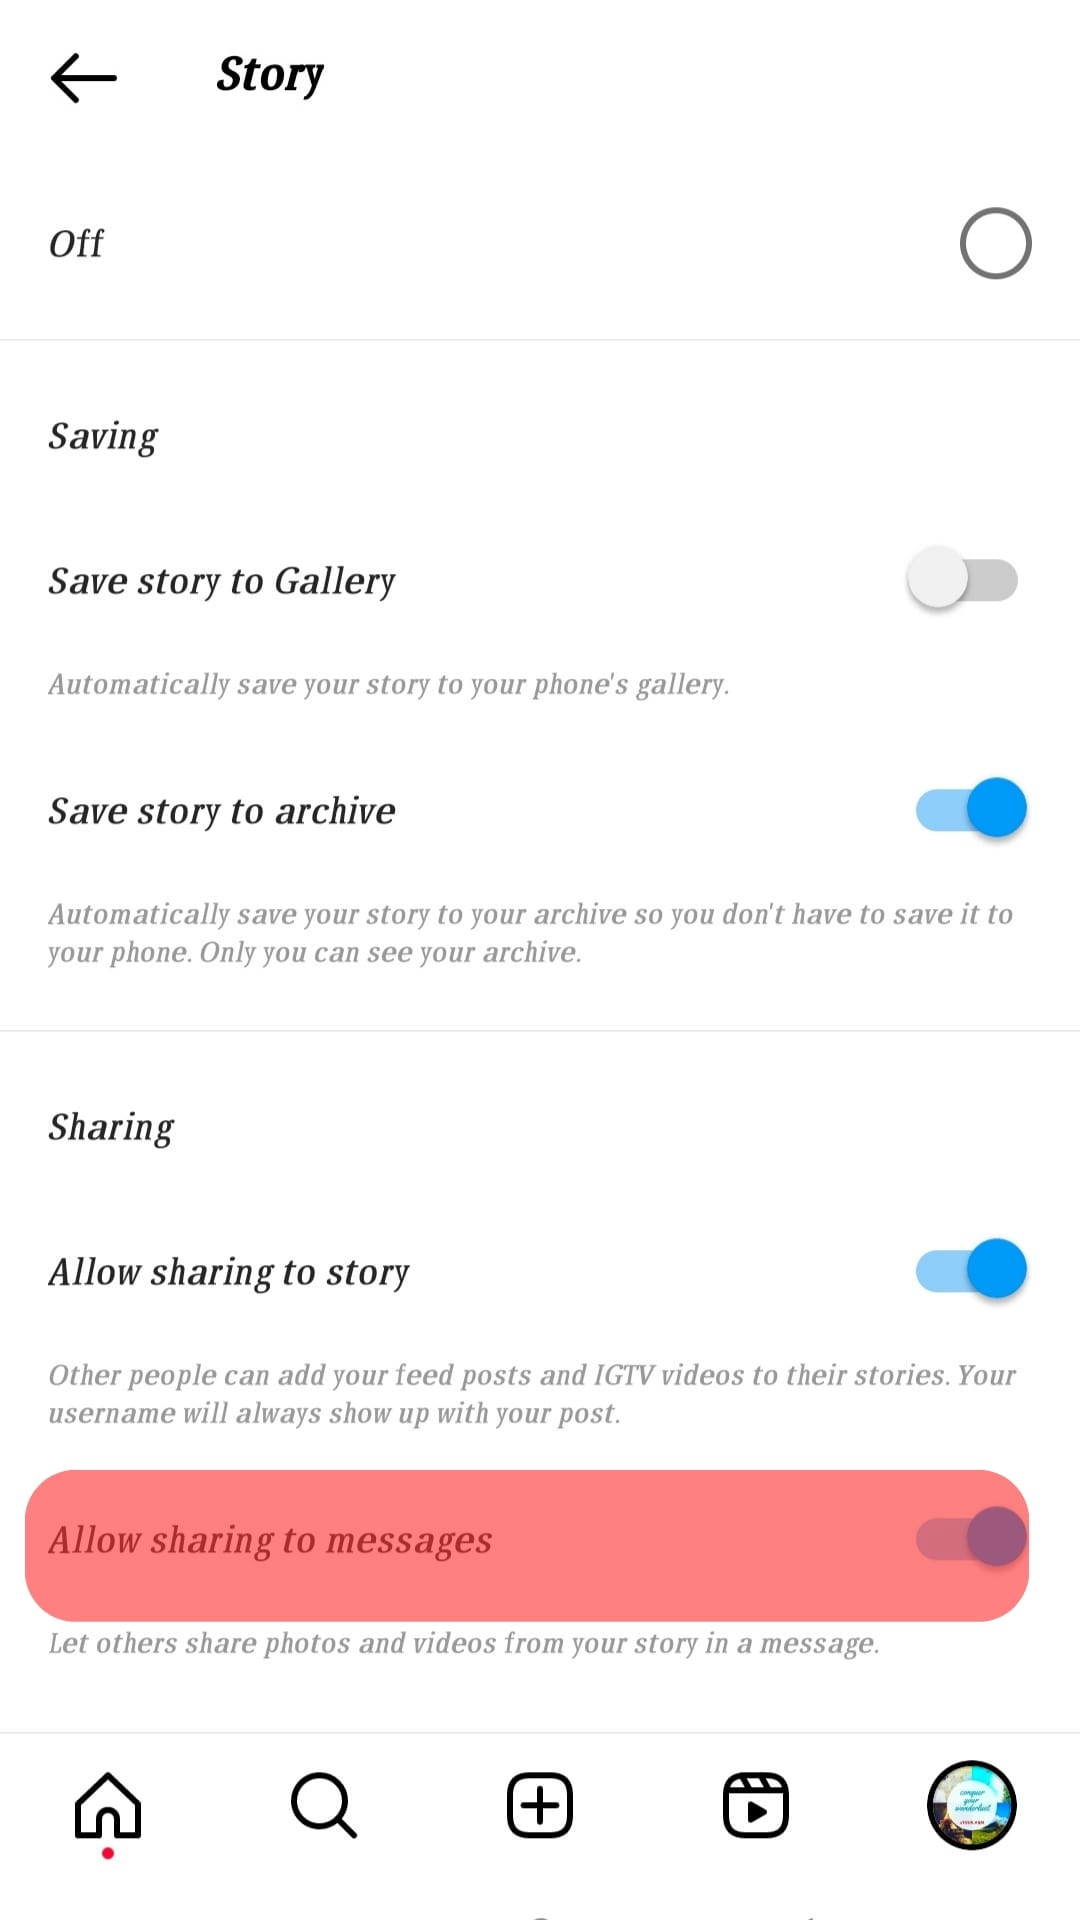 Disable The Allow Sharing To Messages.